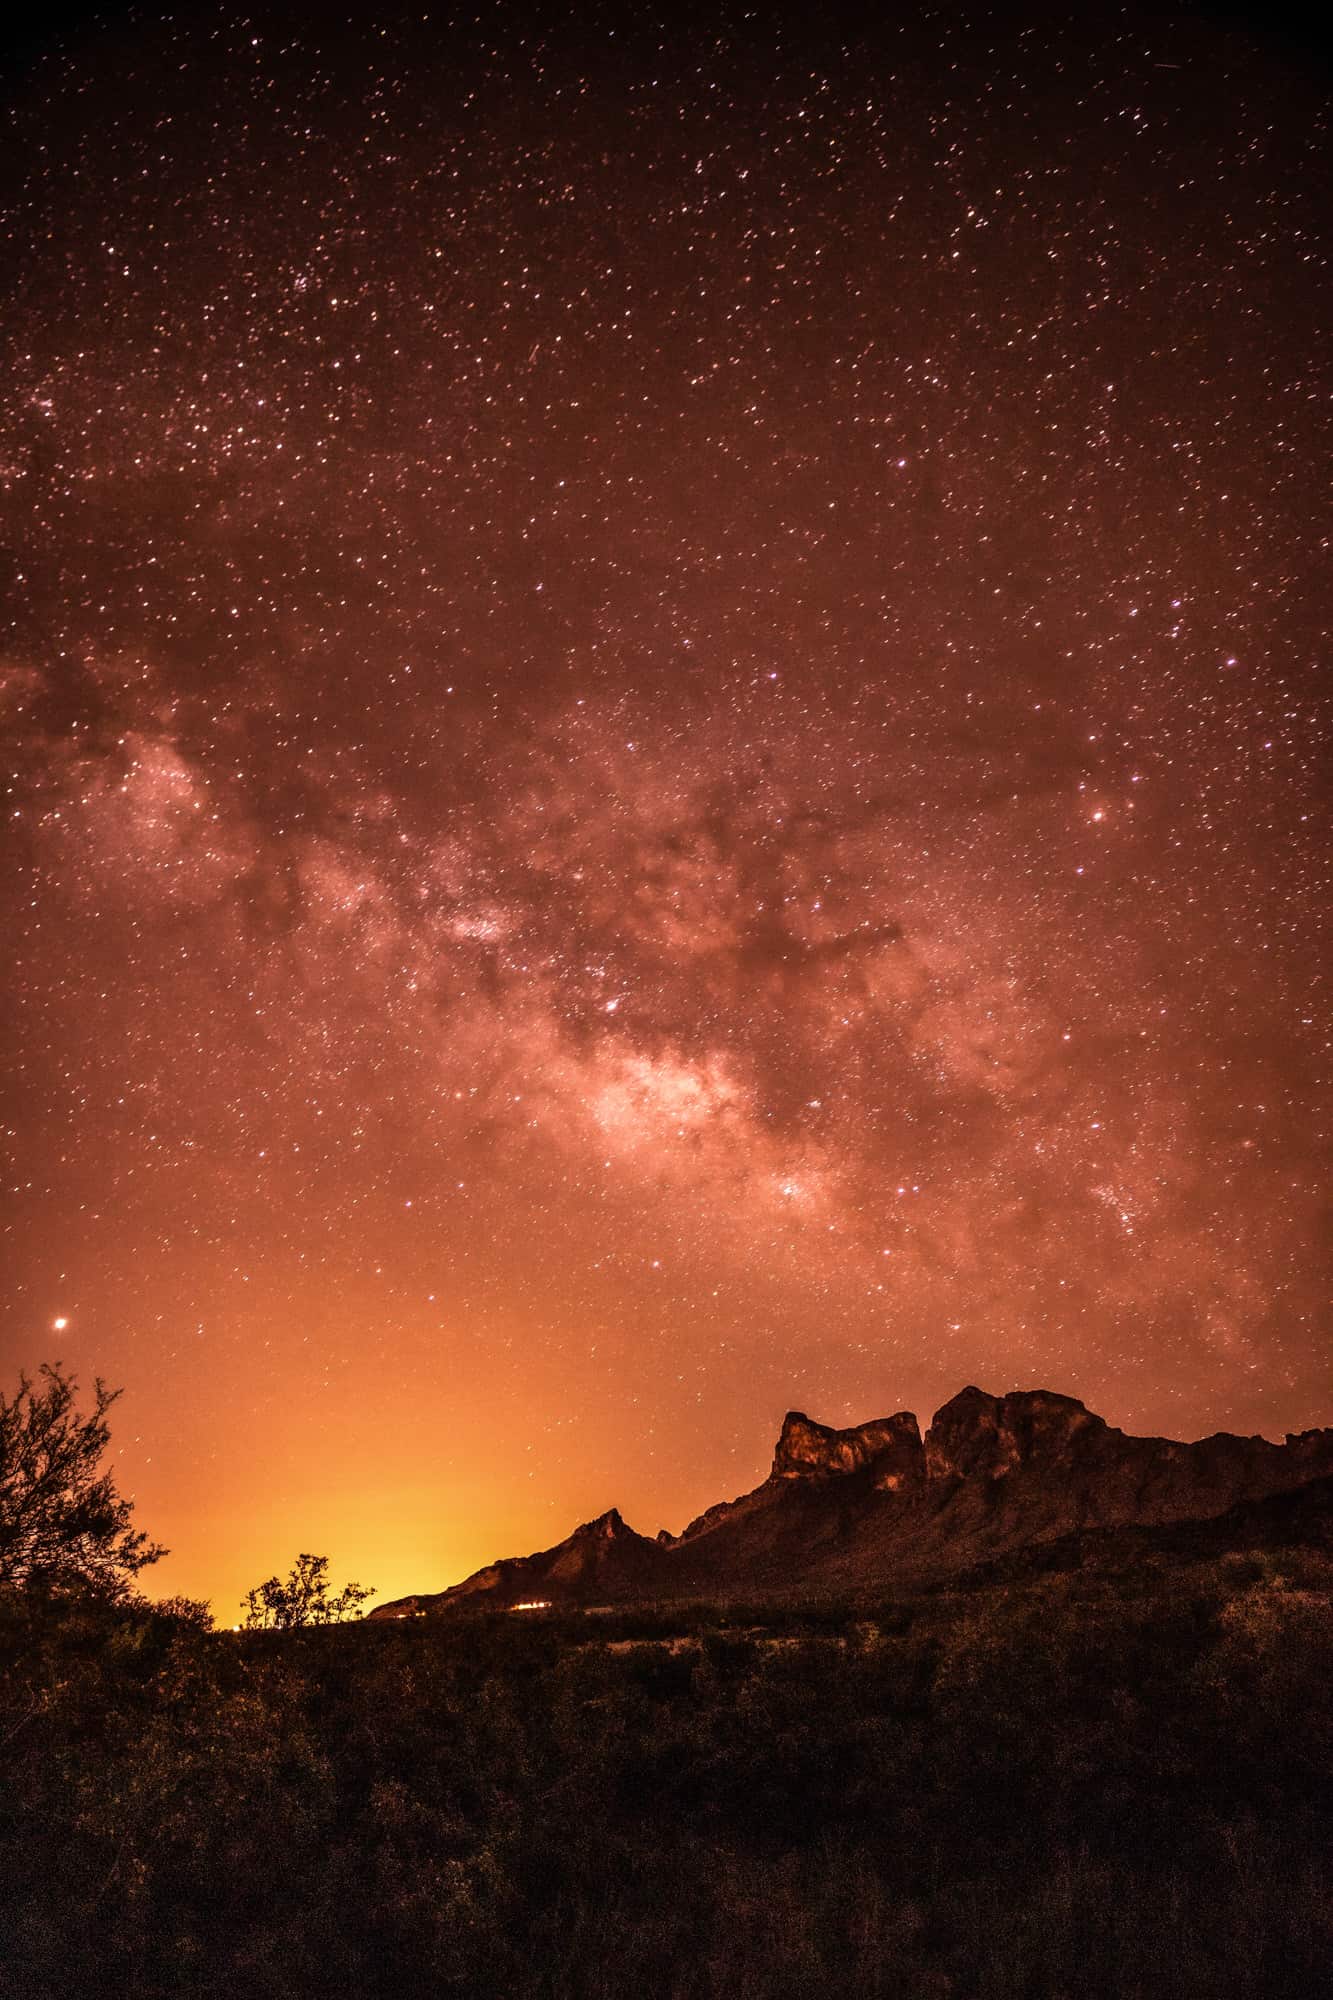 a night photo of picacho peak with the milky way in a reddish night sky